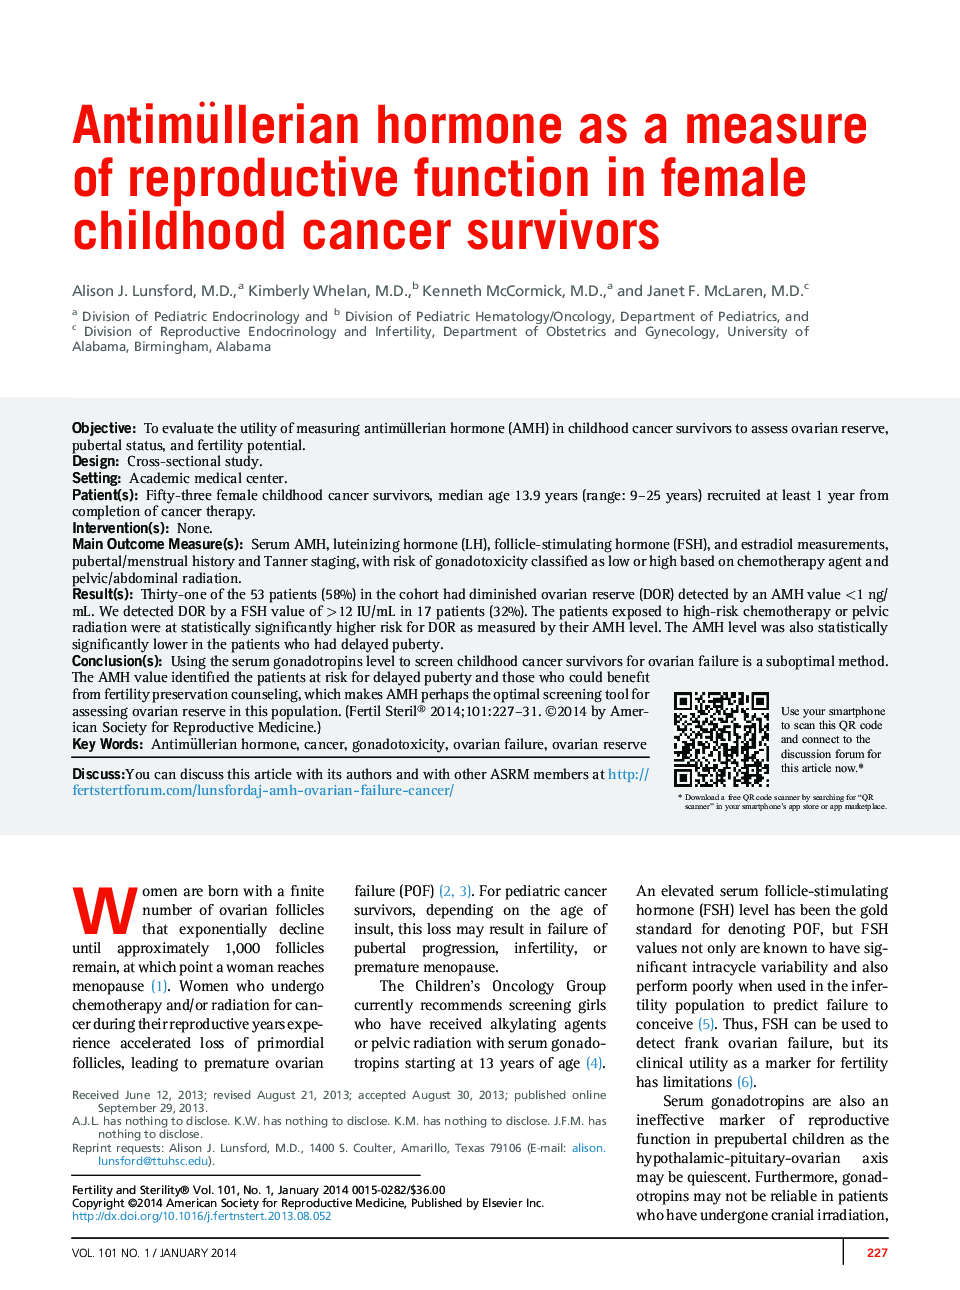 Antimüllerian hormone as a measure of reproductive function in female childhood cancer survivors 